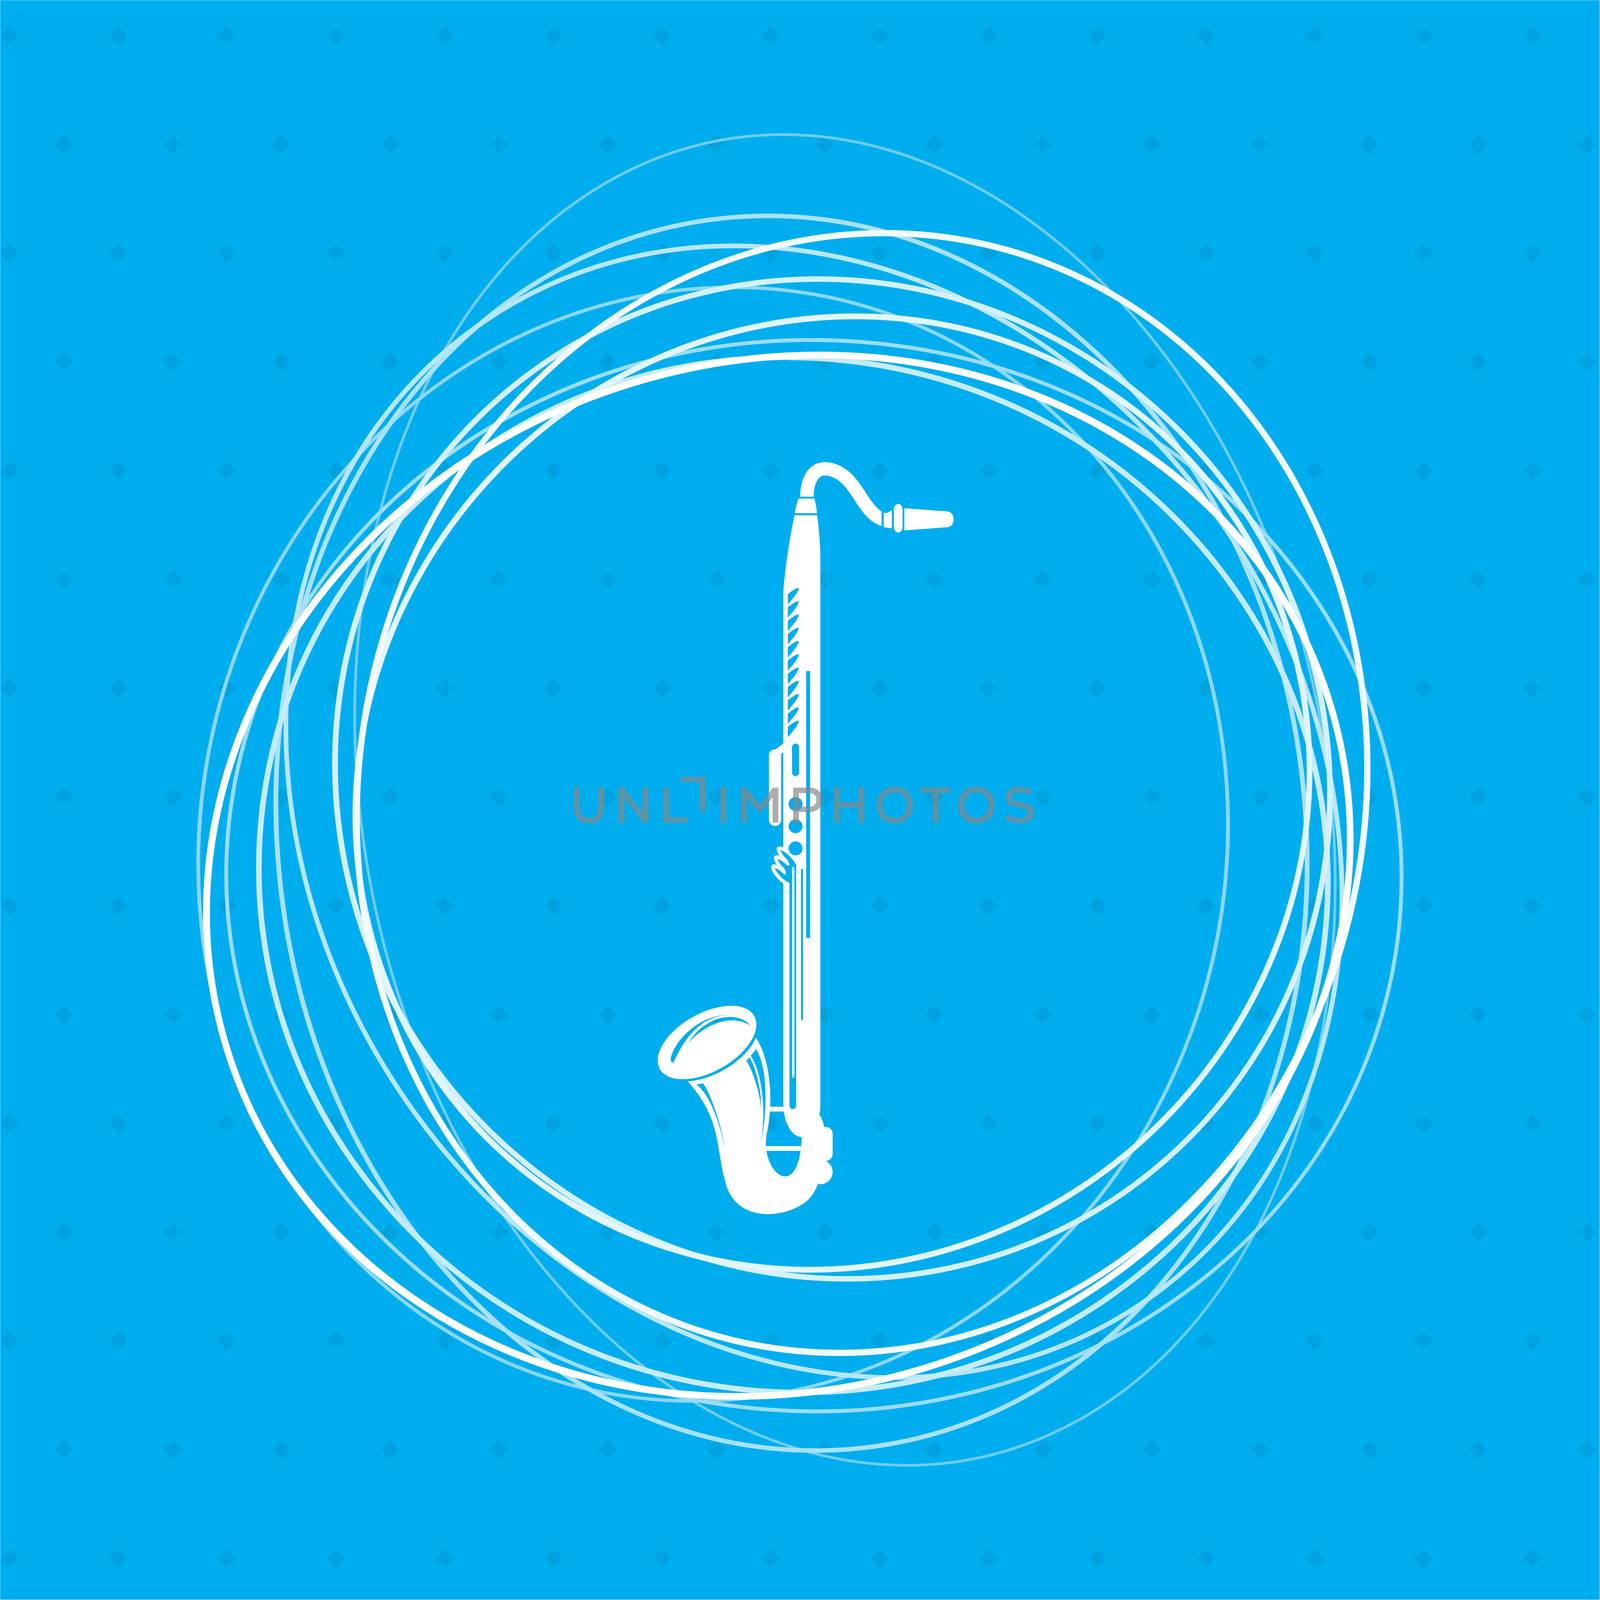 Saxophone icon on a blue background with abstract circles around and place for your text. illustration